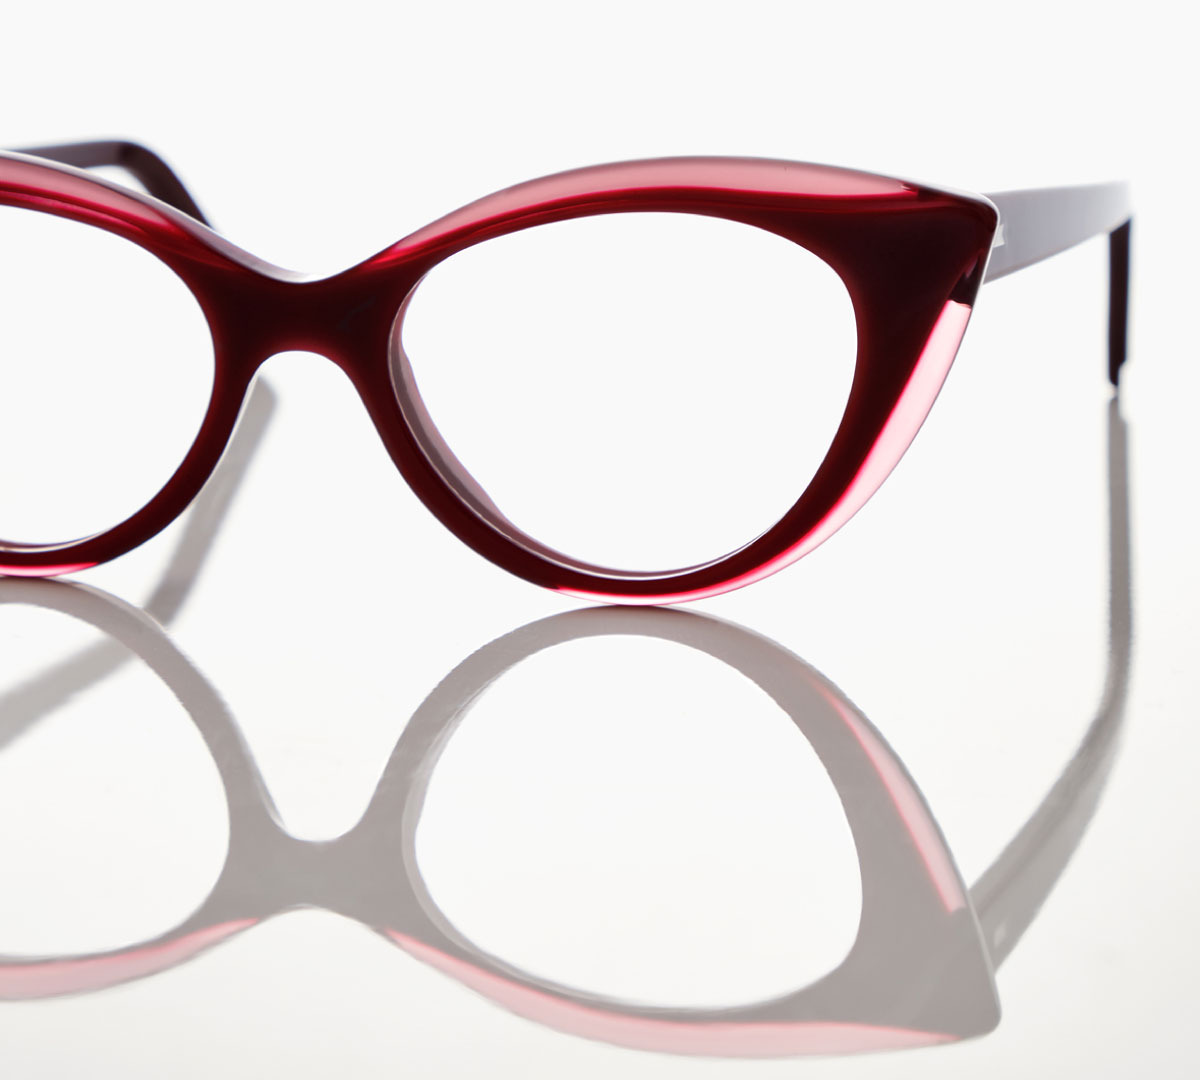 Eyewear trends in shapes and colors